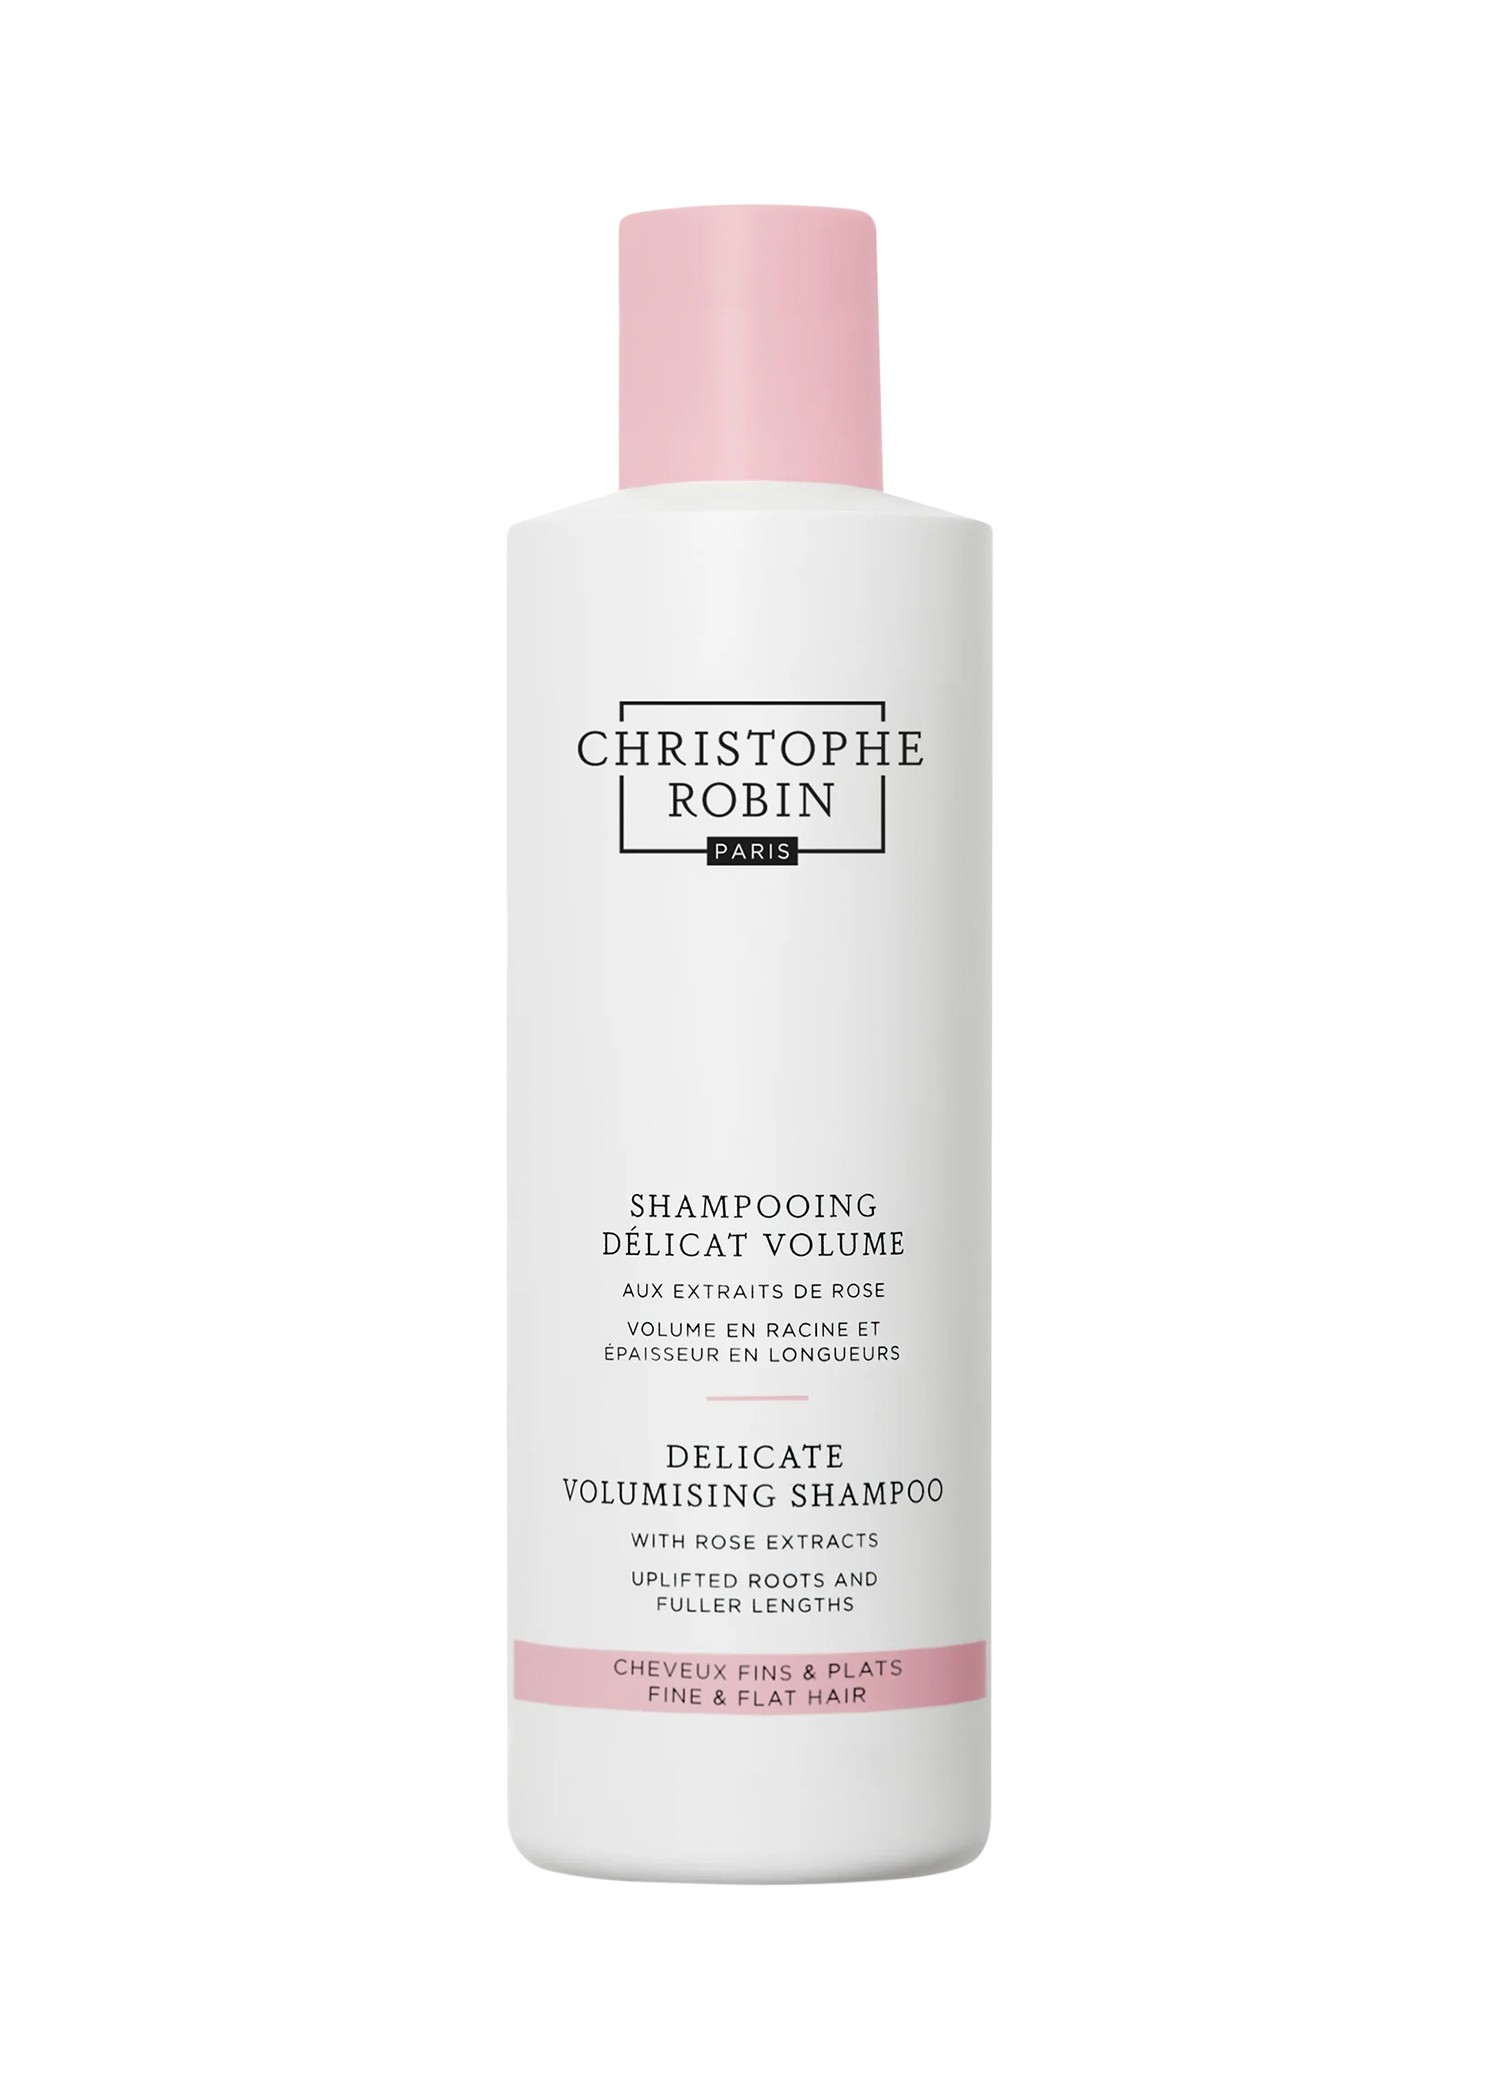 Delicate Volumizing Shampoo with Rose Extracts 250 ml